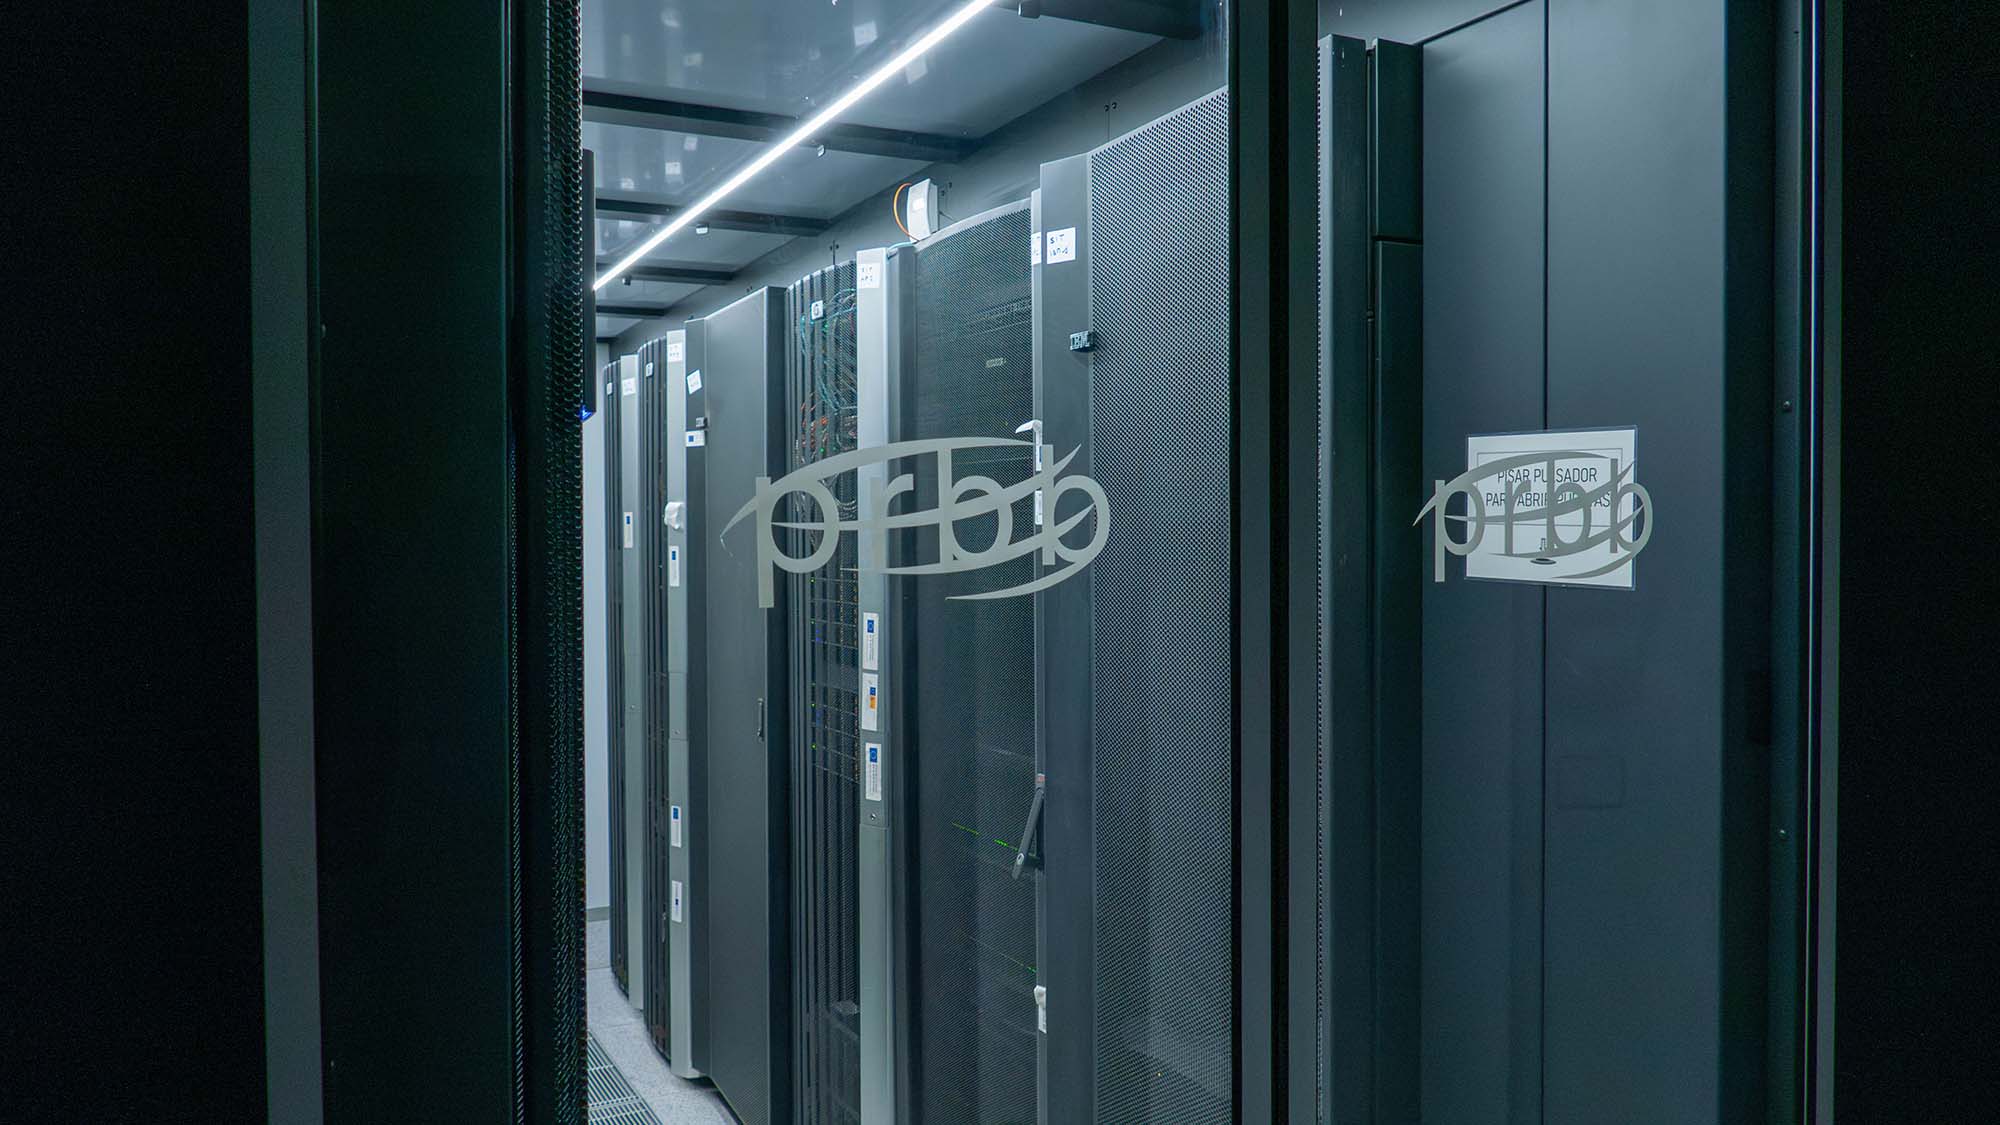 The PRBB refurbishes its data centre to optimise its present and future performance